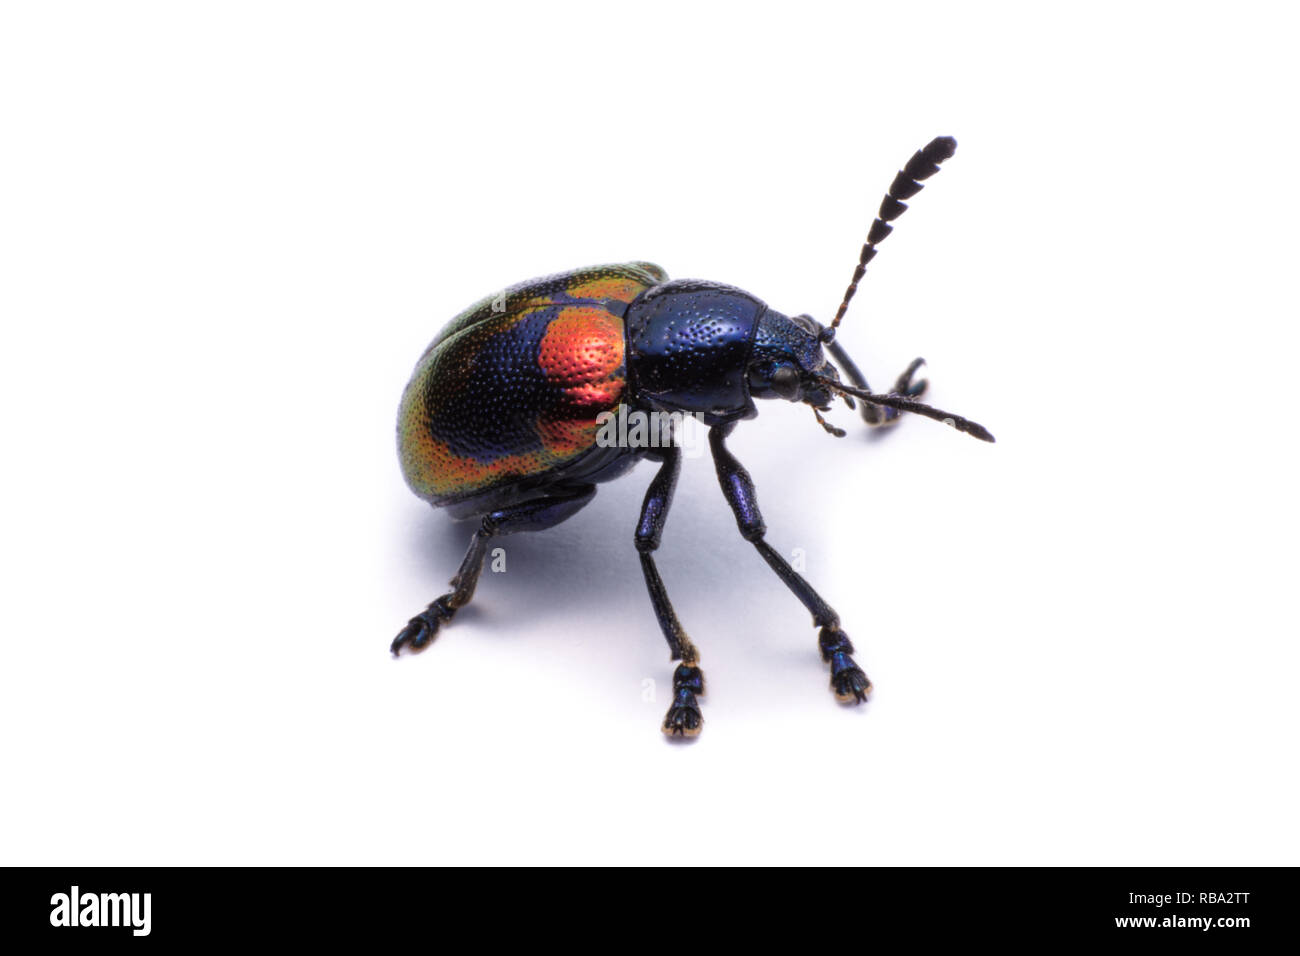 Blue Milkweed Beetle; Scientific Name Chrysochus pulcher Baly, isolated on white Stock Photo